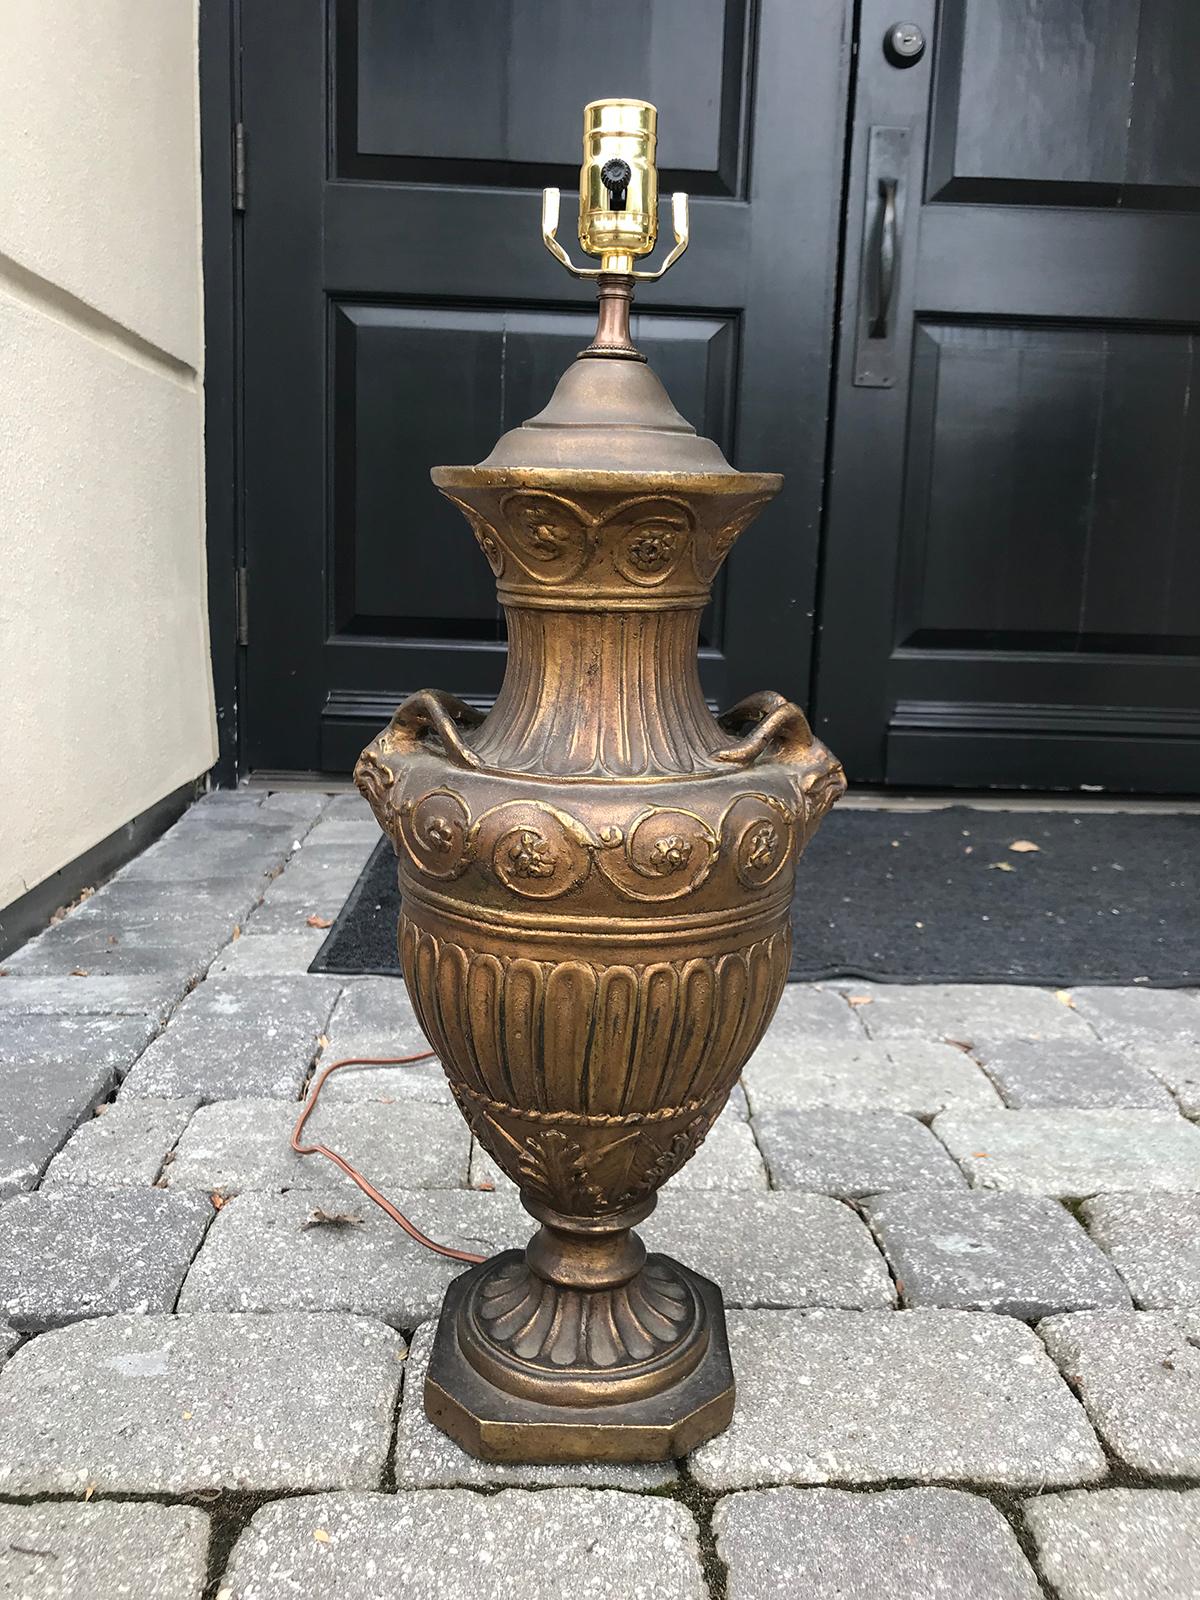 Early 20th century neoclassical gilt Repousee urn lamp
very elegant
new wiring.